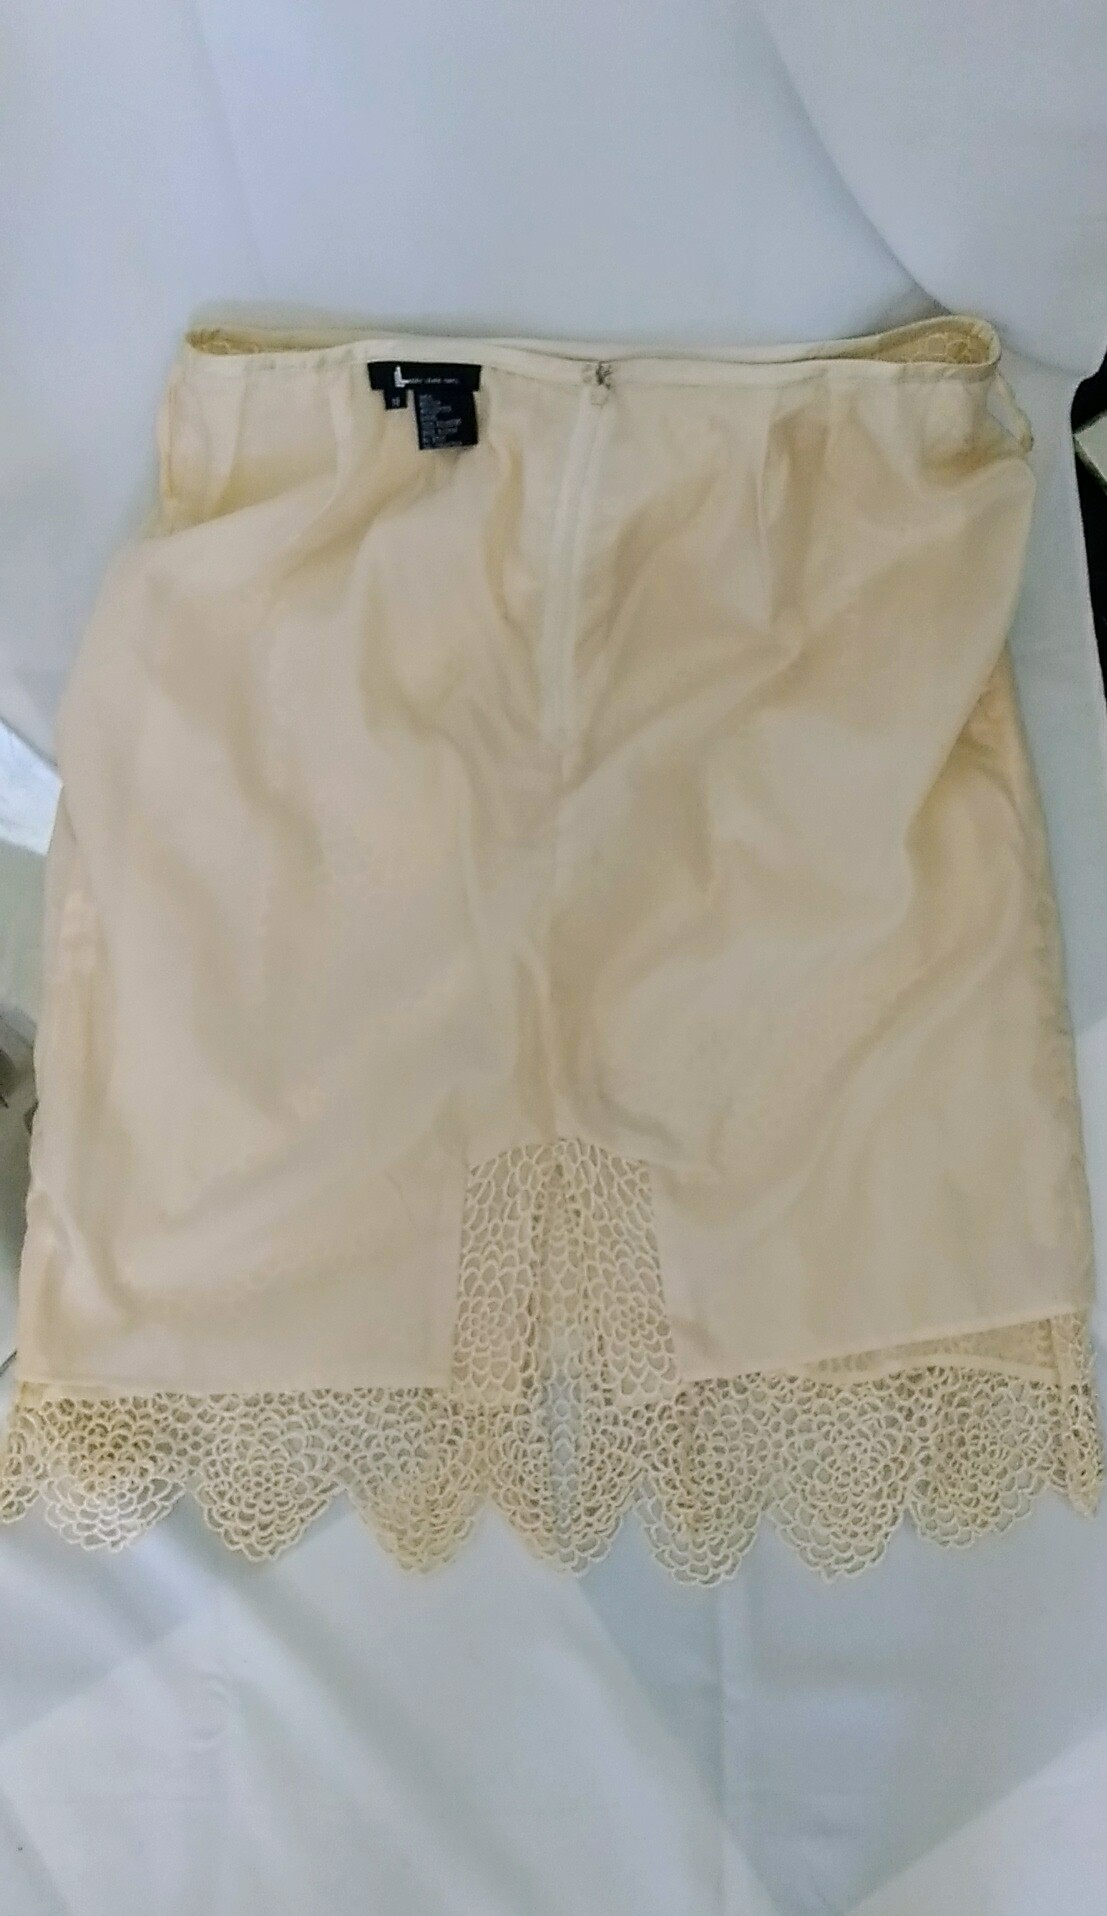 Vintage 1990's Larry Levine Cream Silk and Cotton Suit with Crochet Skirt